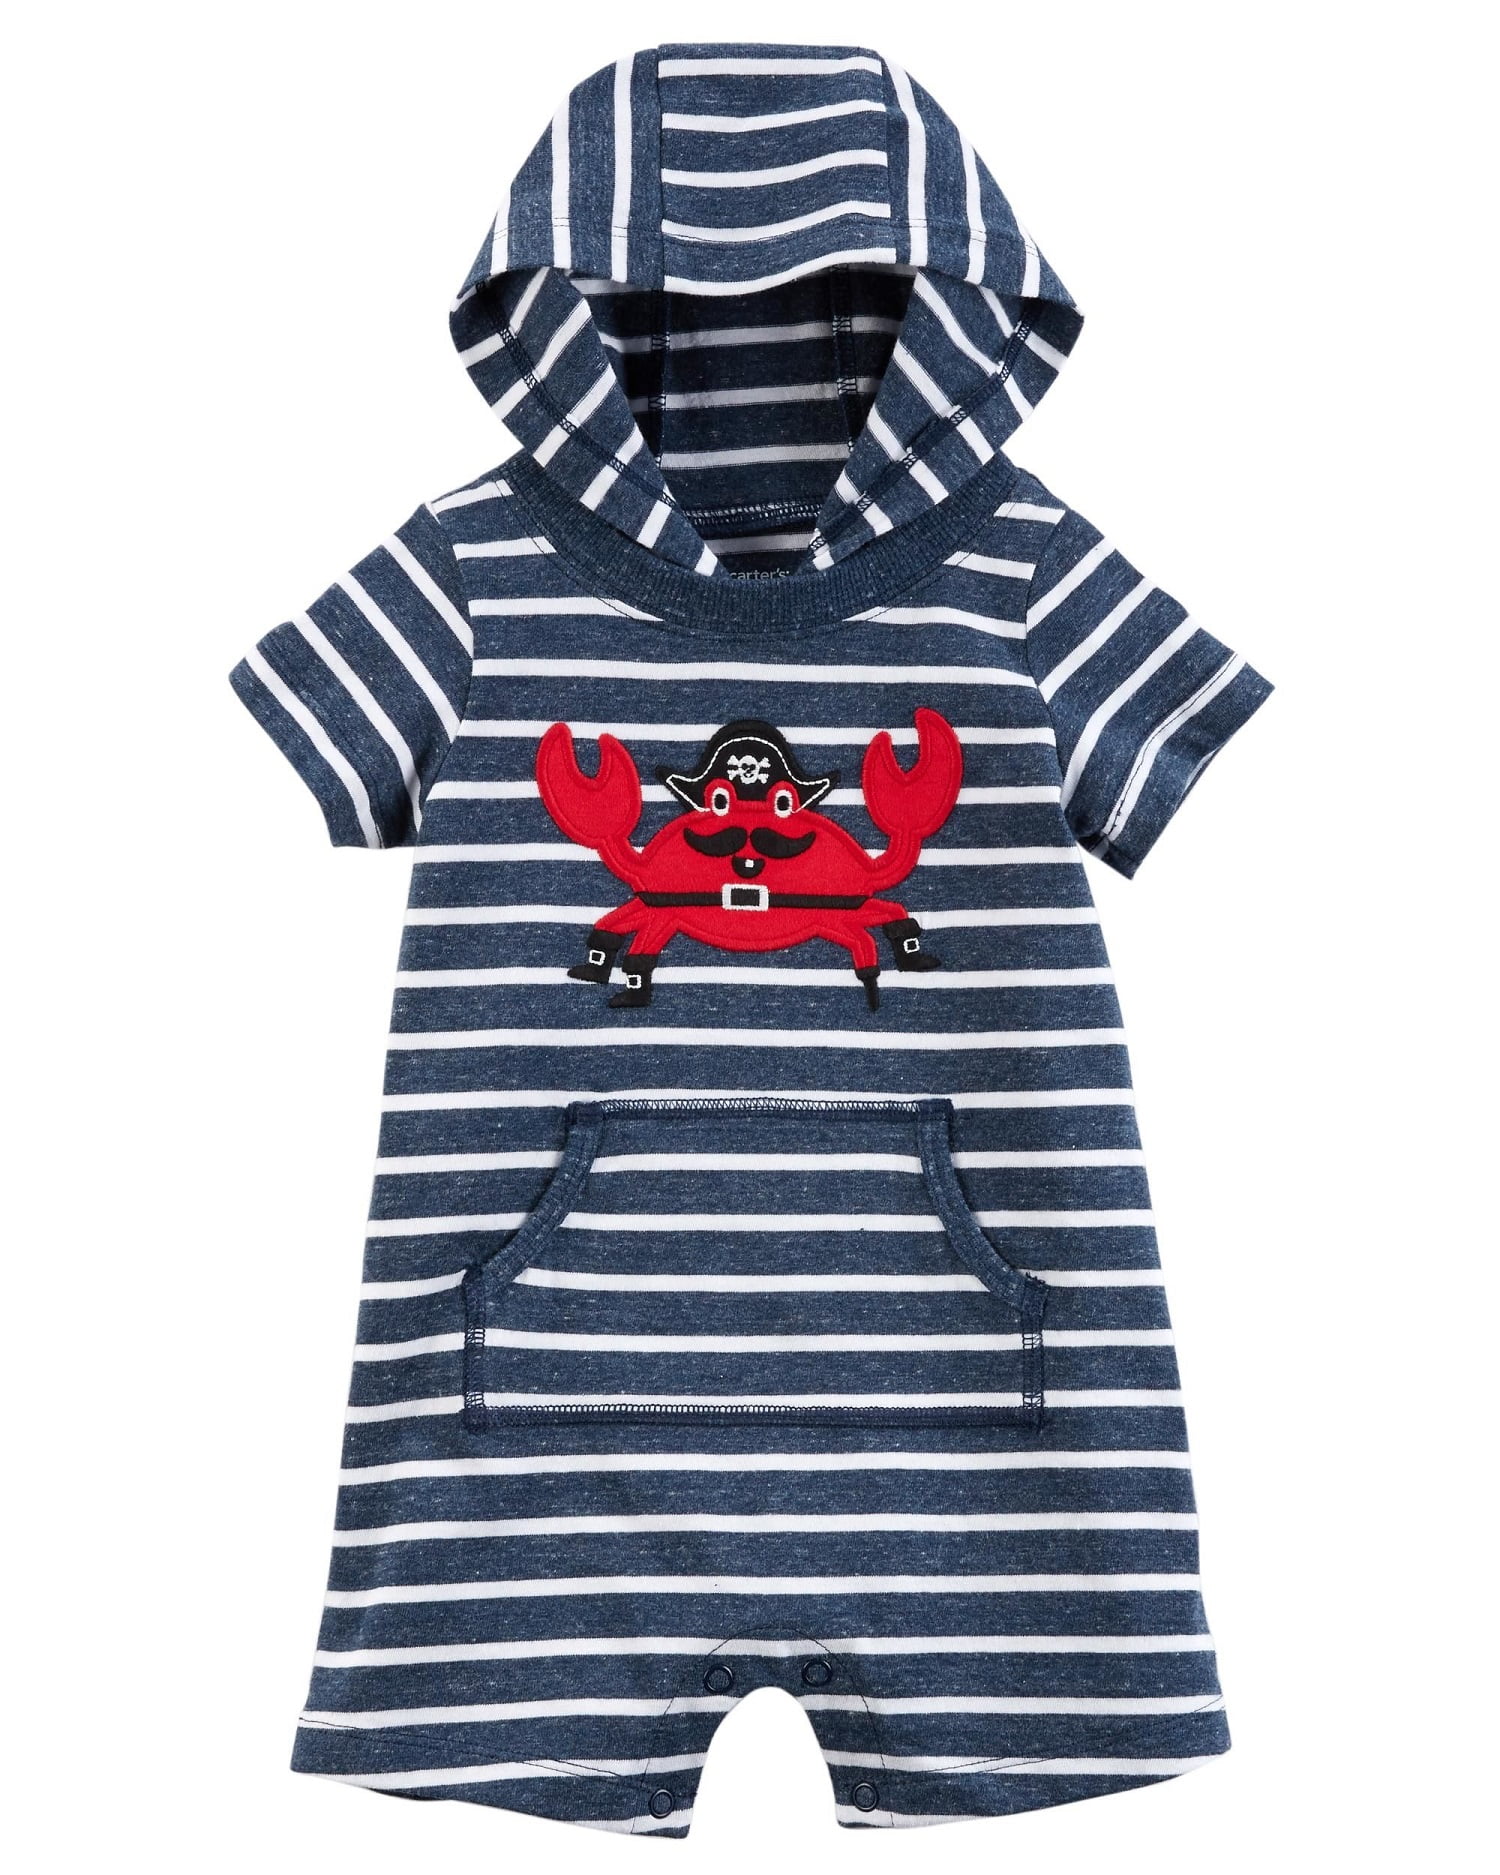 New Carter's 1 Piece Baby Boys Romper Blue White Striped Hooded Crab All Sizes 